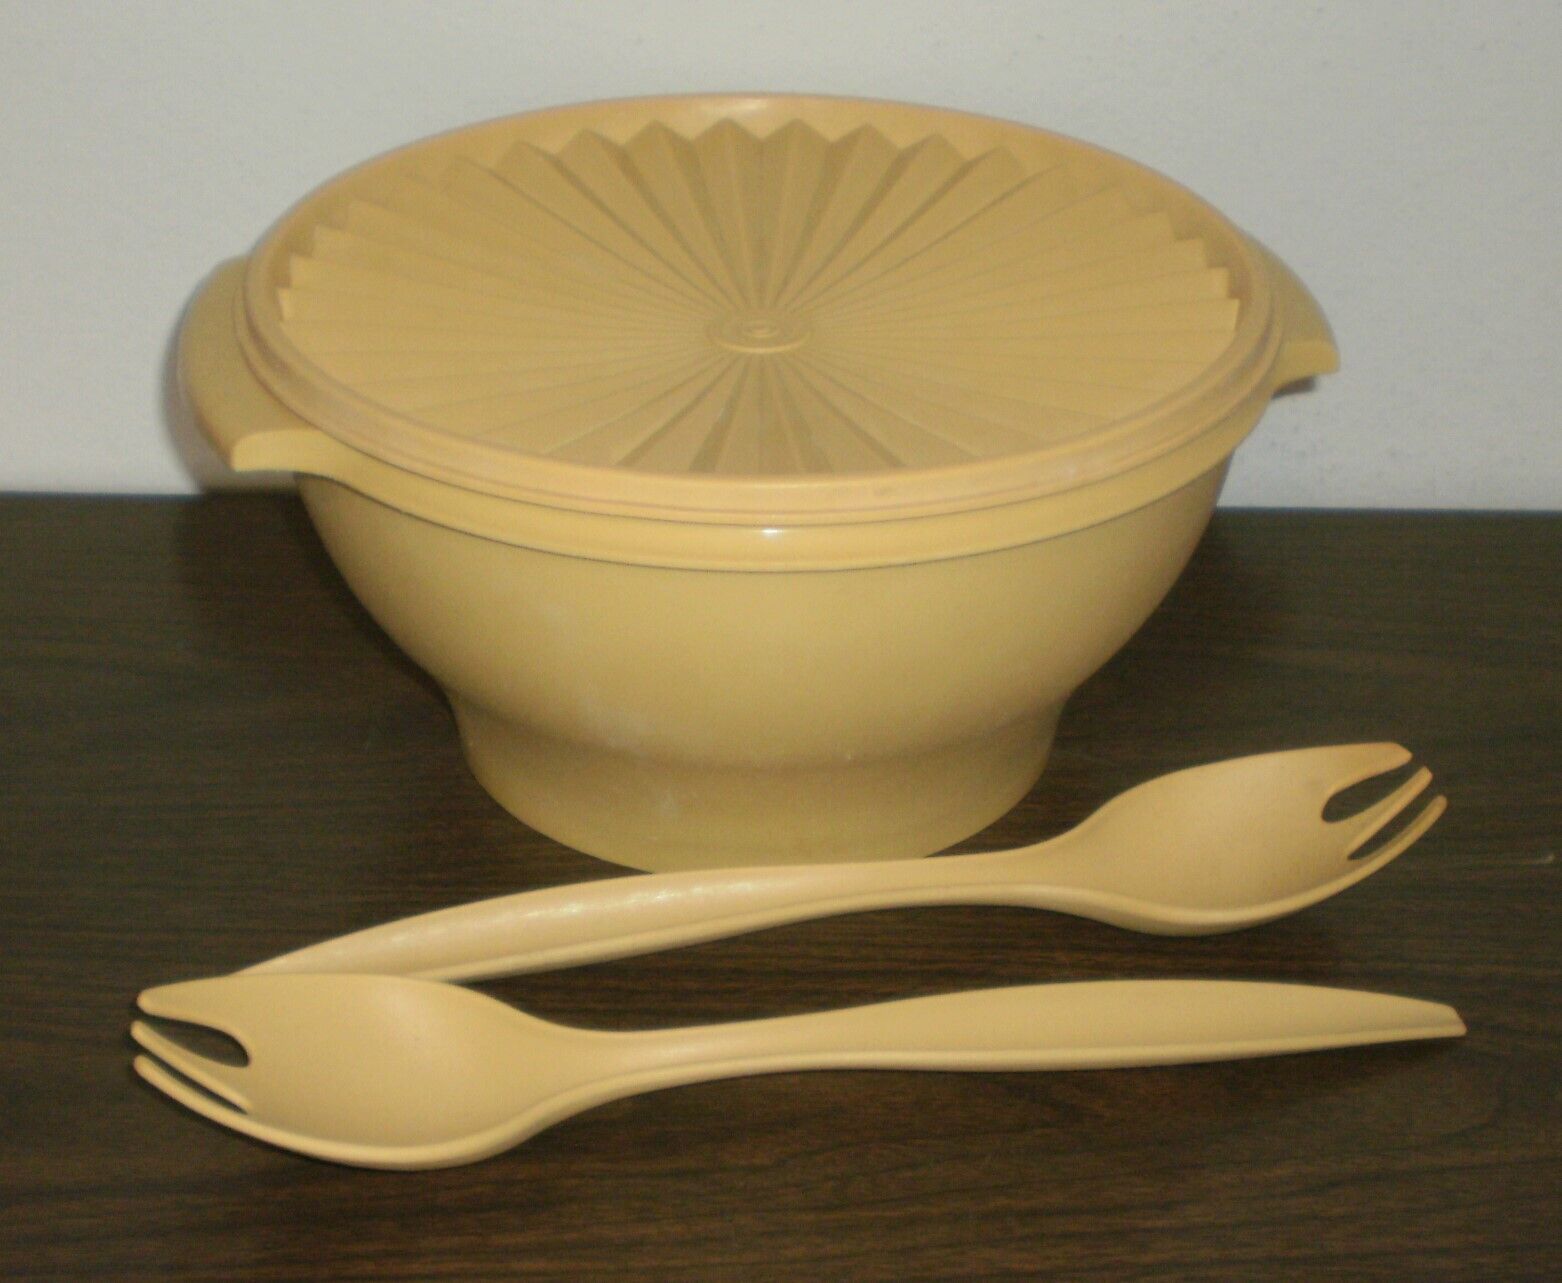 Vintage Tupperware Gold Salad Serving Bowl #880 w/Servalier Lid #881 and Tongs